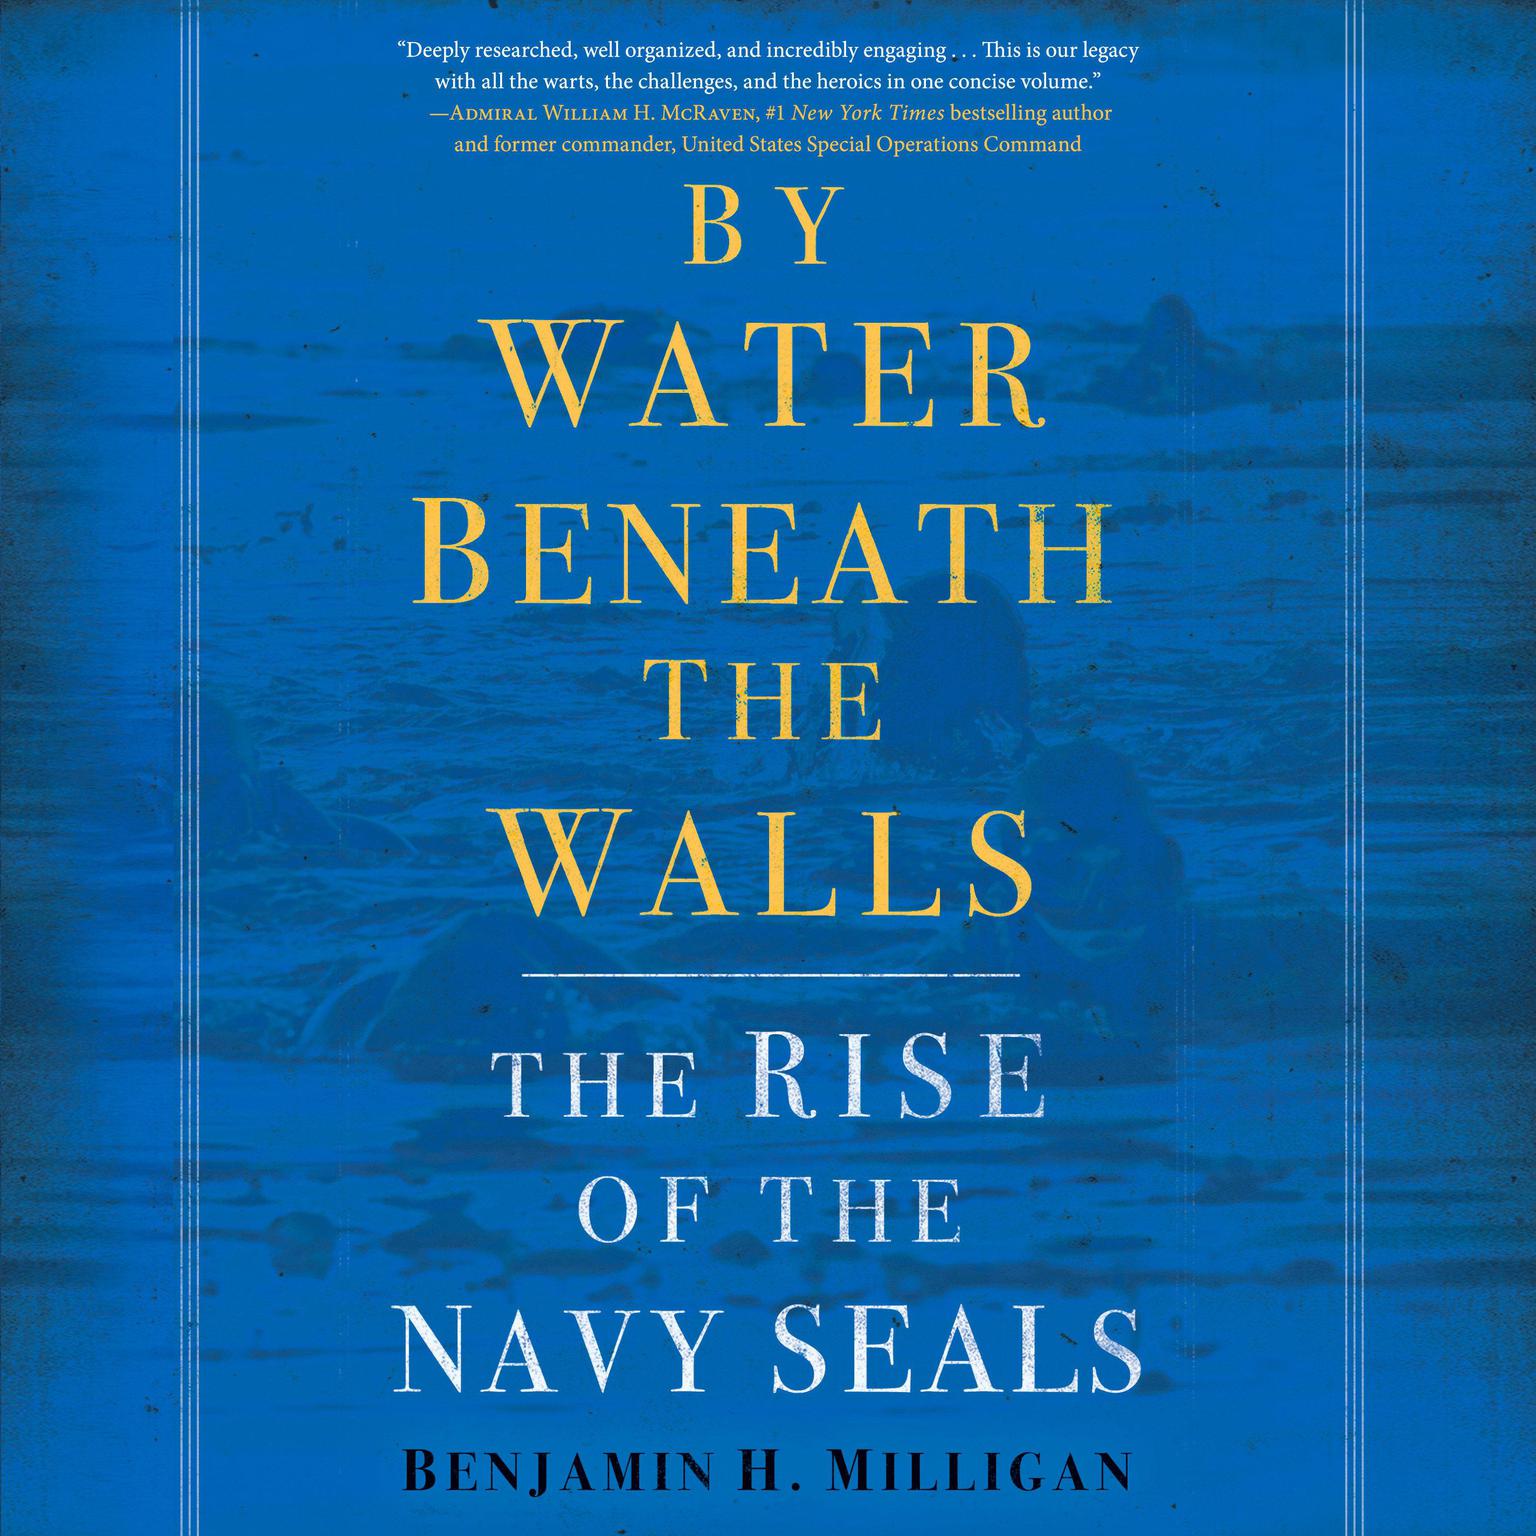 By Water Beneath the Walls: The Rise of the Navy SEALs Audiobook, by Benjamin H. Milligan